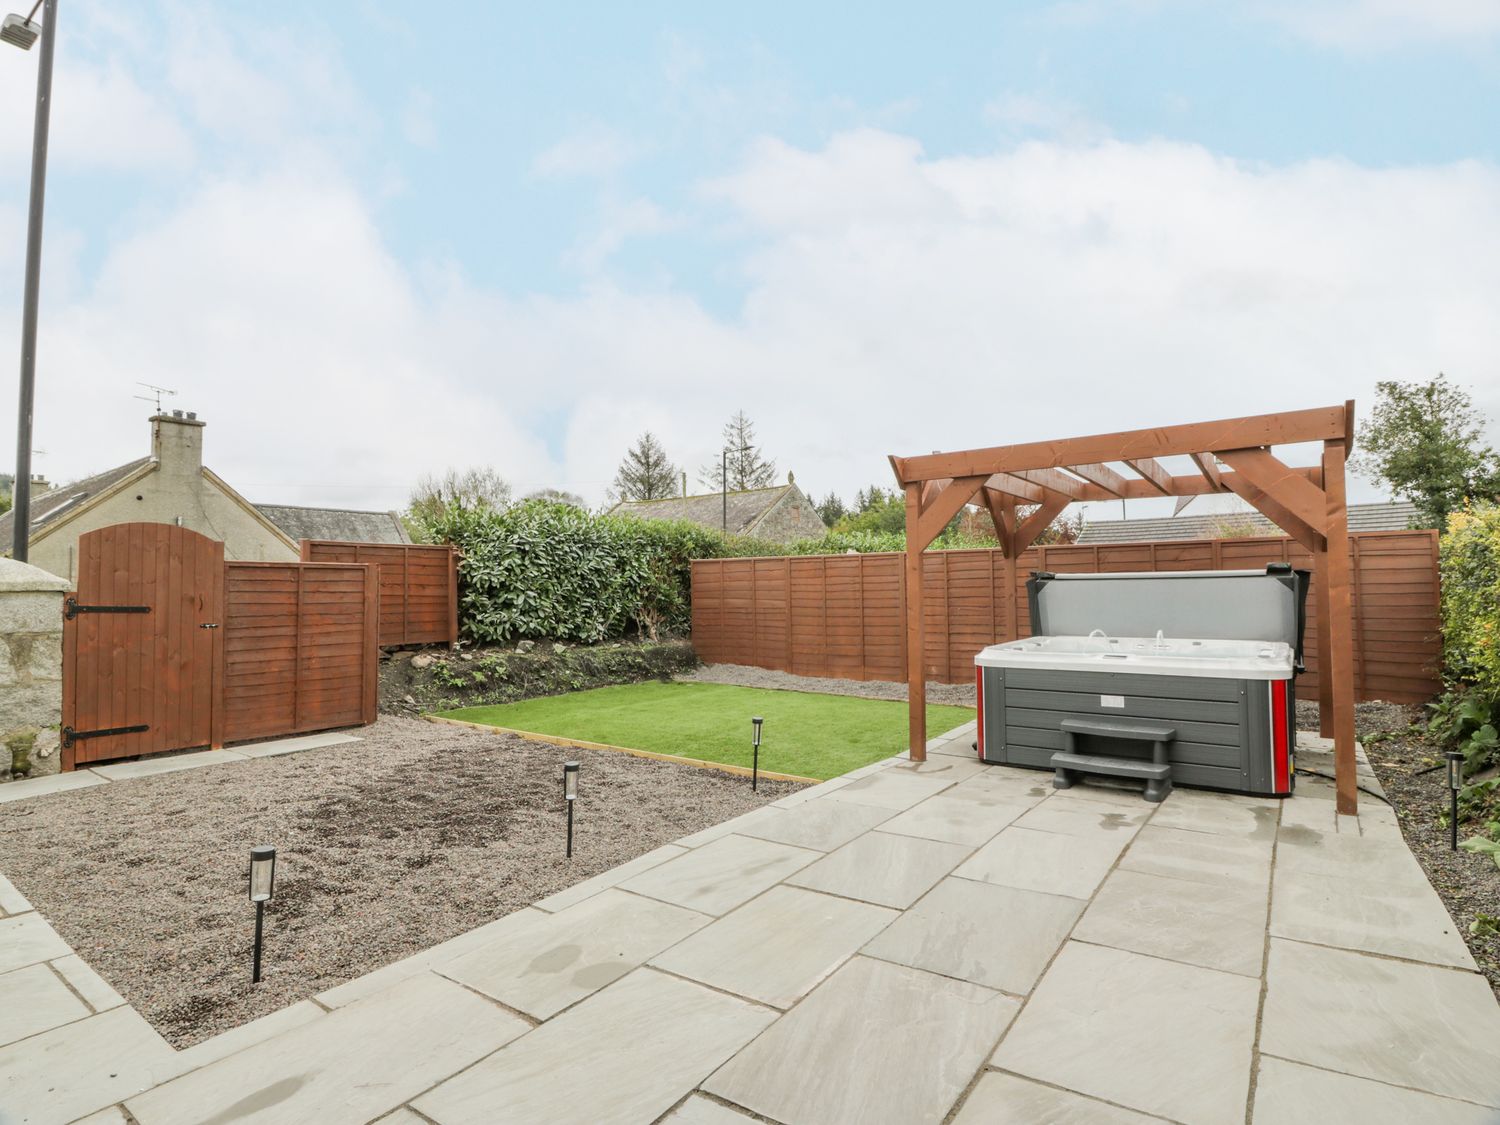 Fleetbank in Gatehouse of Fleet, Dumfries and Galloway. Four-bedroom home with hot tub. Contemporary